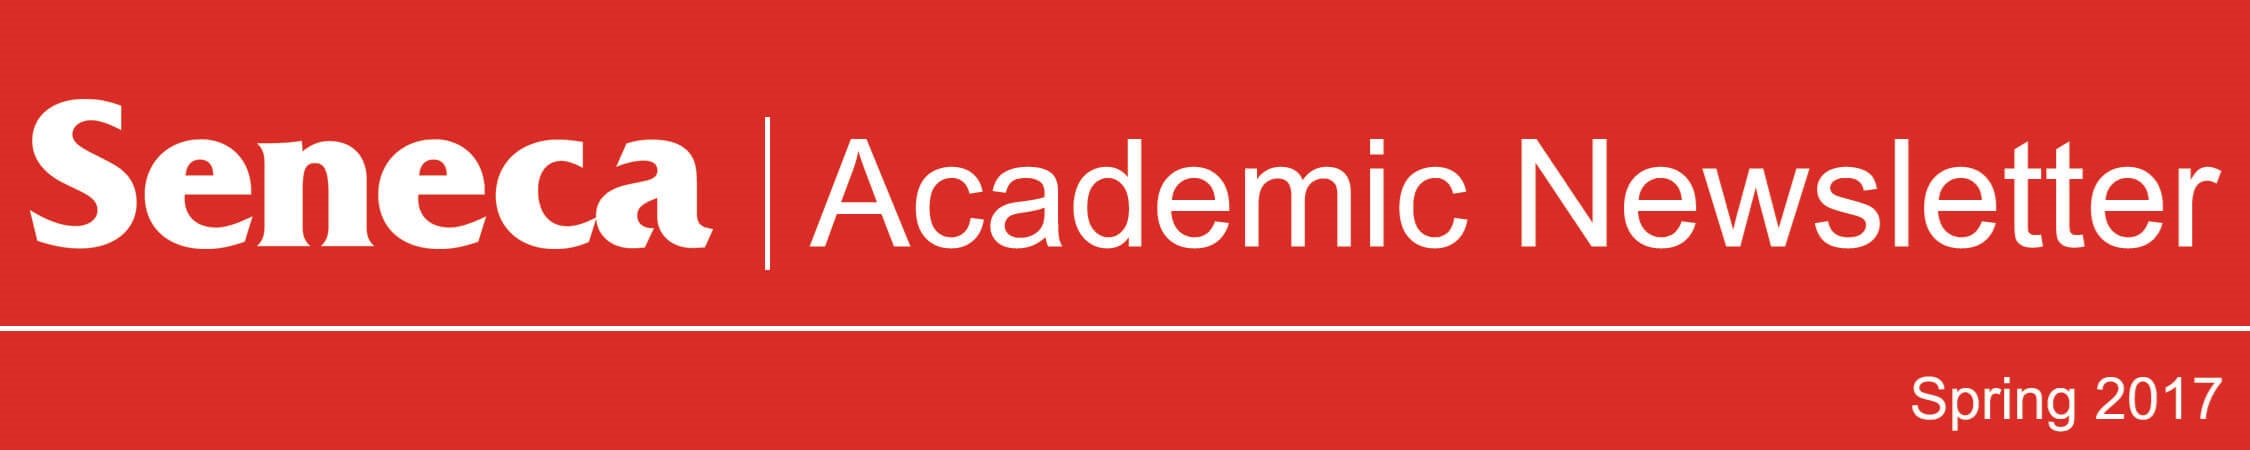 The header logo for the Spring 2017 issue of the Academic Newsletter